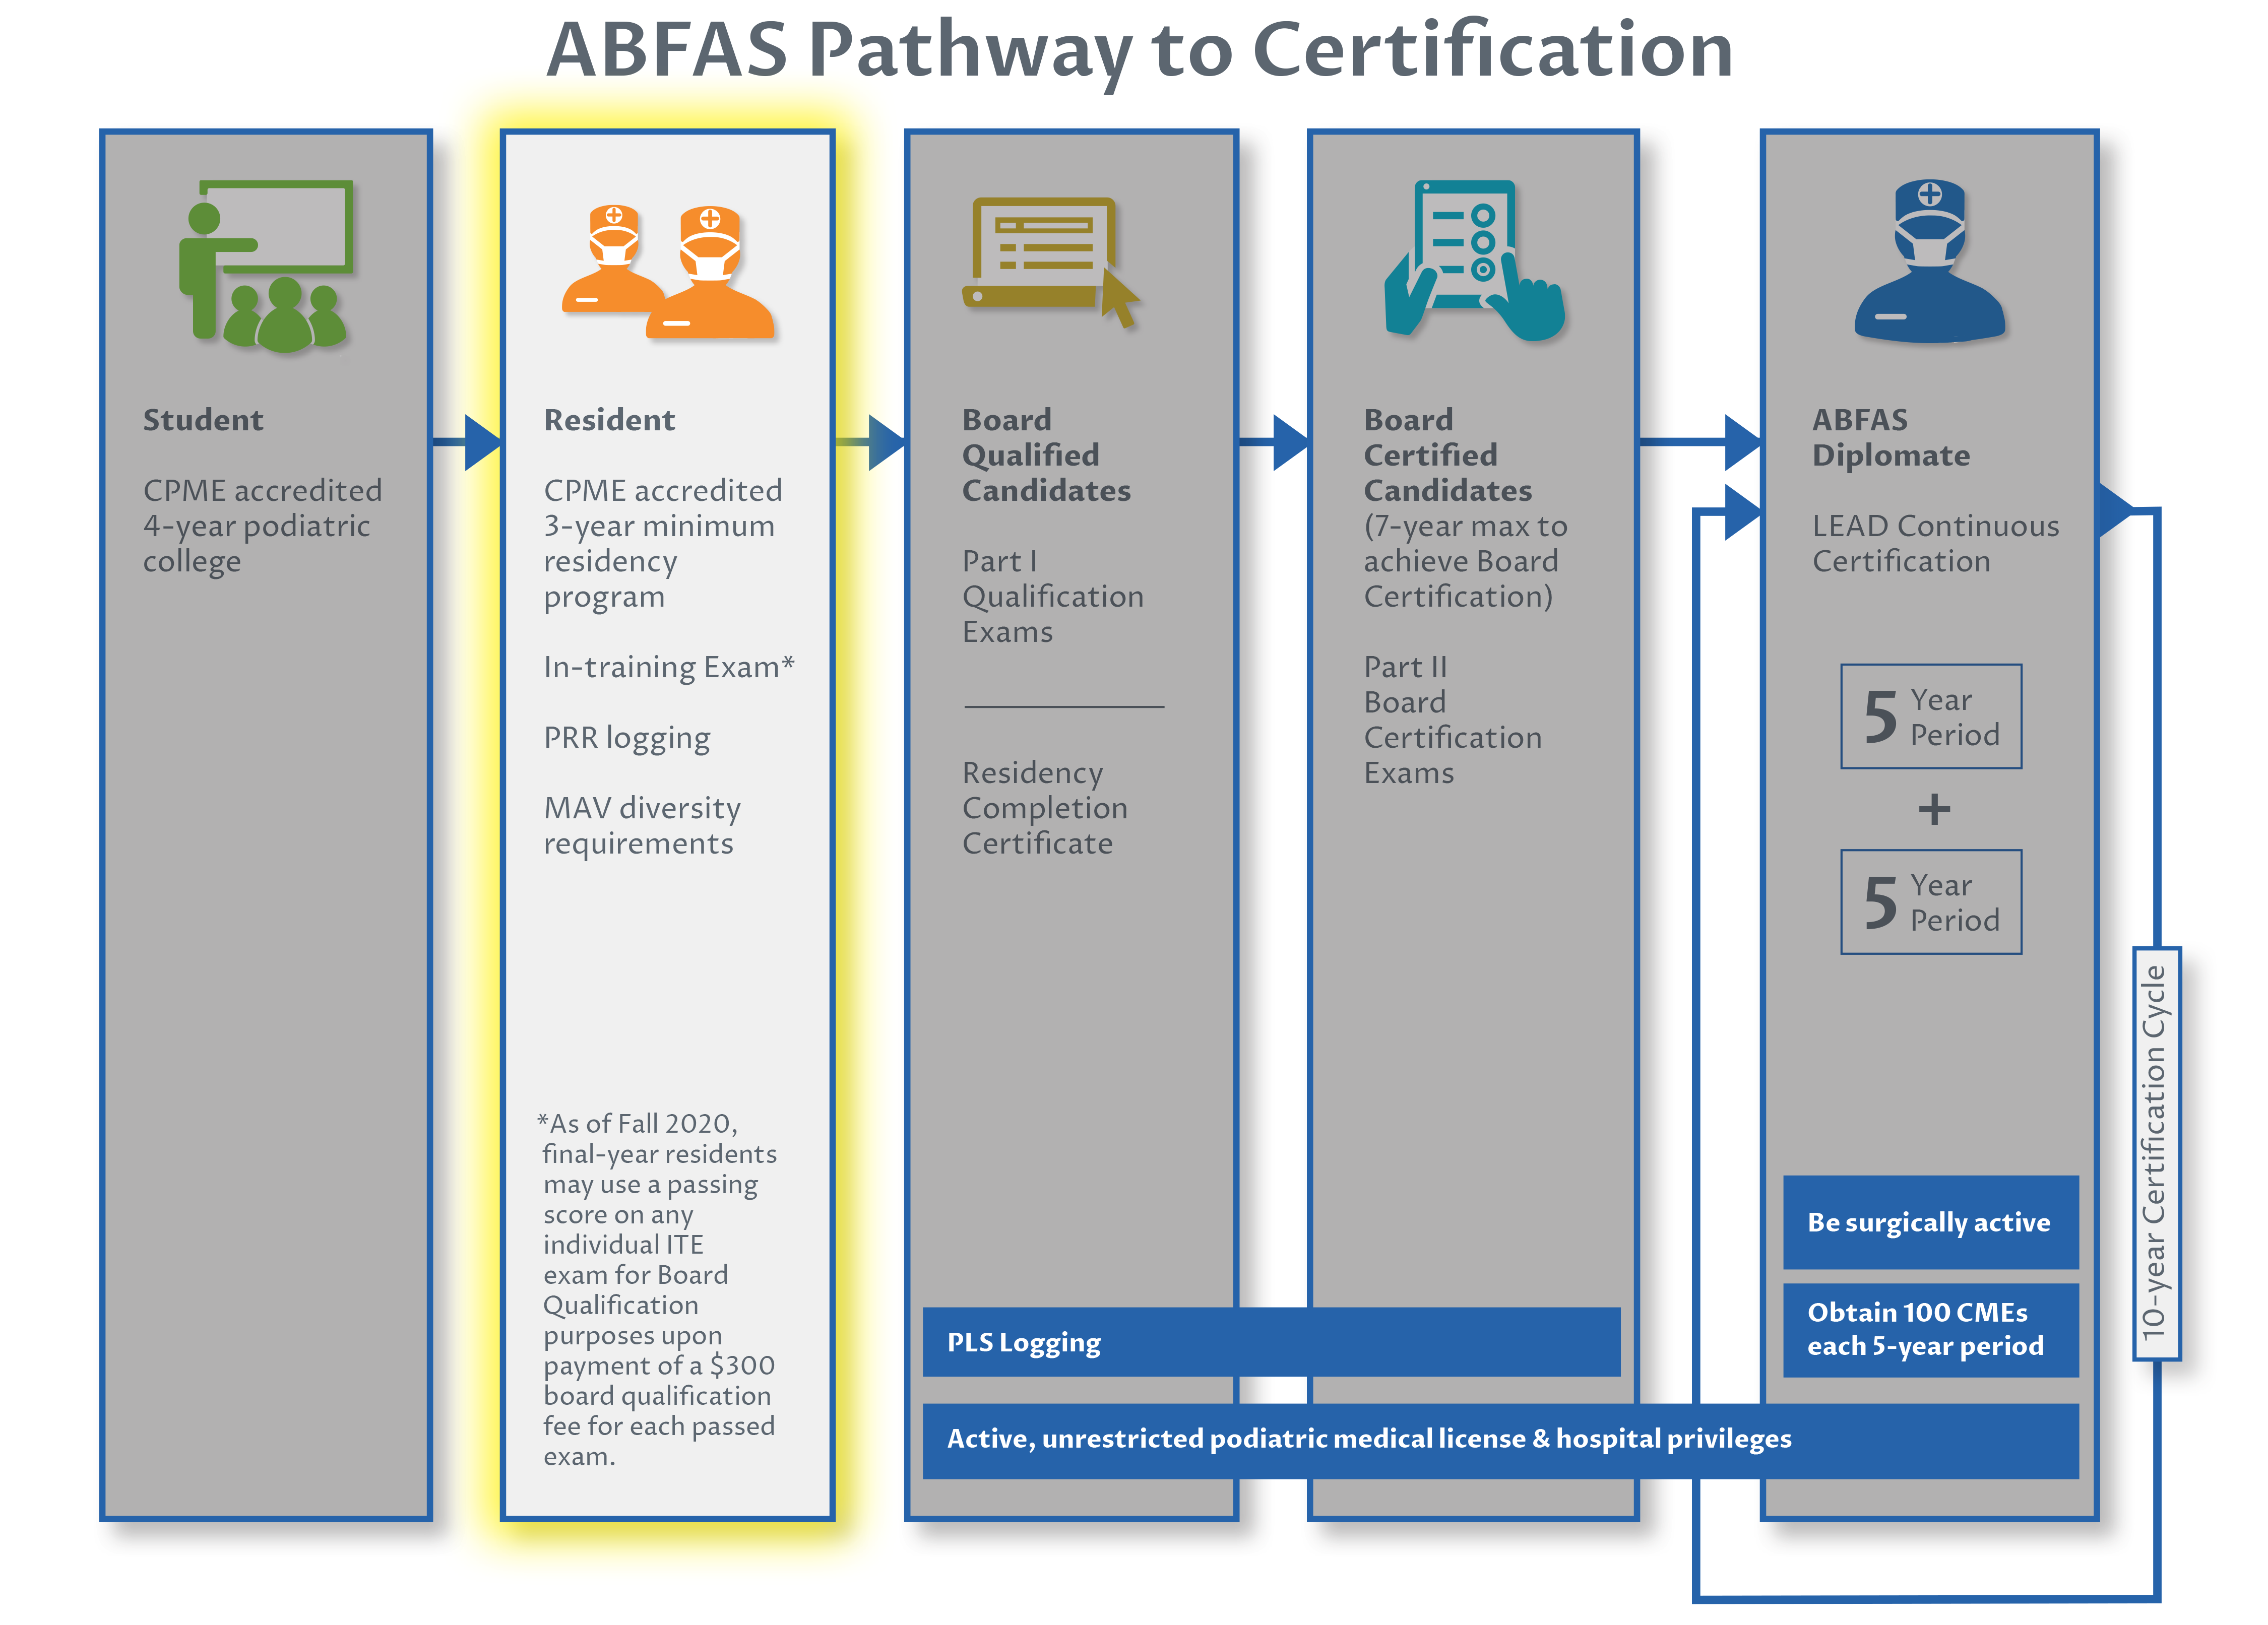 Overview of the ABFAS Pathway to Certification for Residents